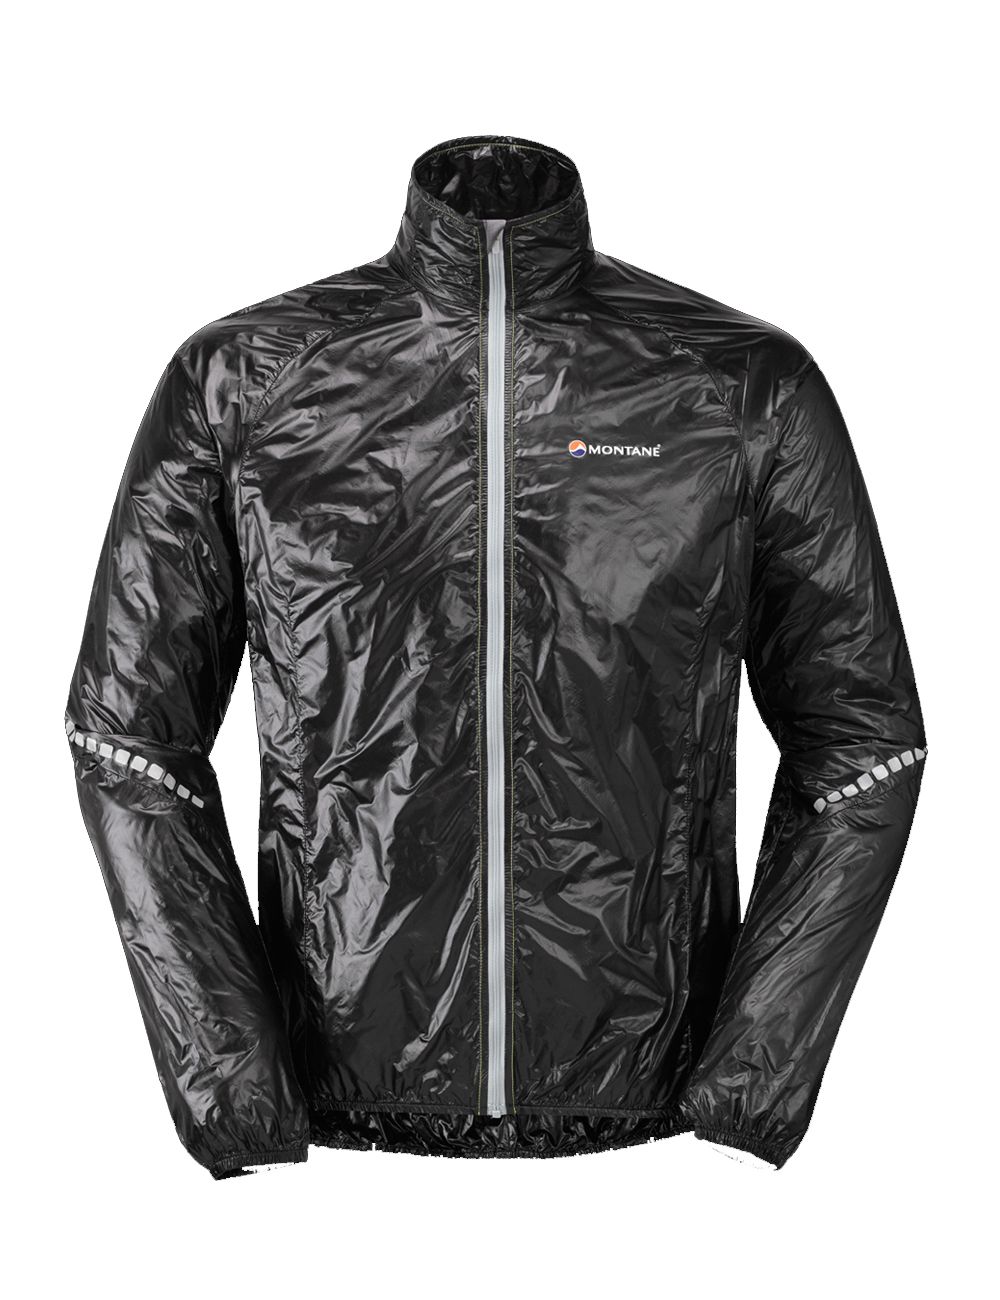 Montane Slipstream Velo GL Ultra Lightweight Jacket ( Small Only ) - £39.99, Jackets - Windproof / Water Resistant